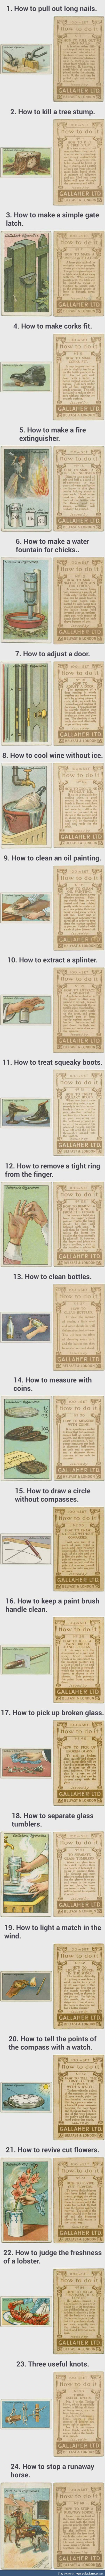 24 Life Hacks from 100 Years Ago That Are Still Useful in Today's Society